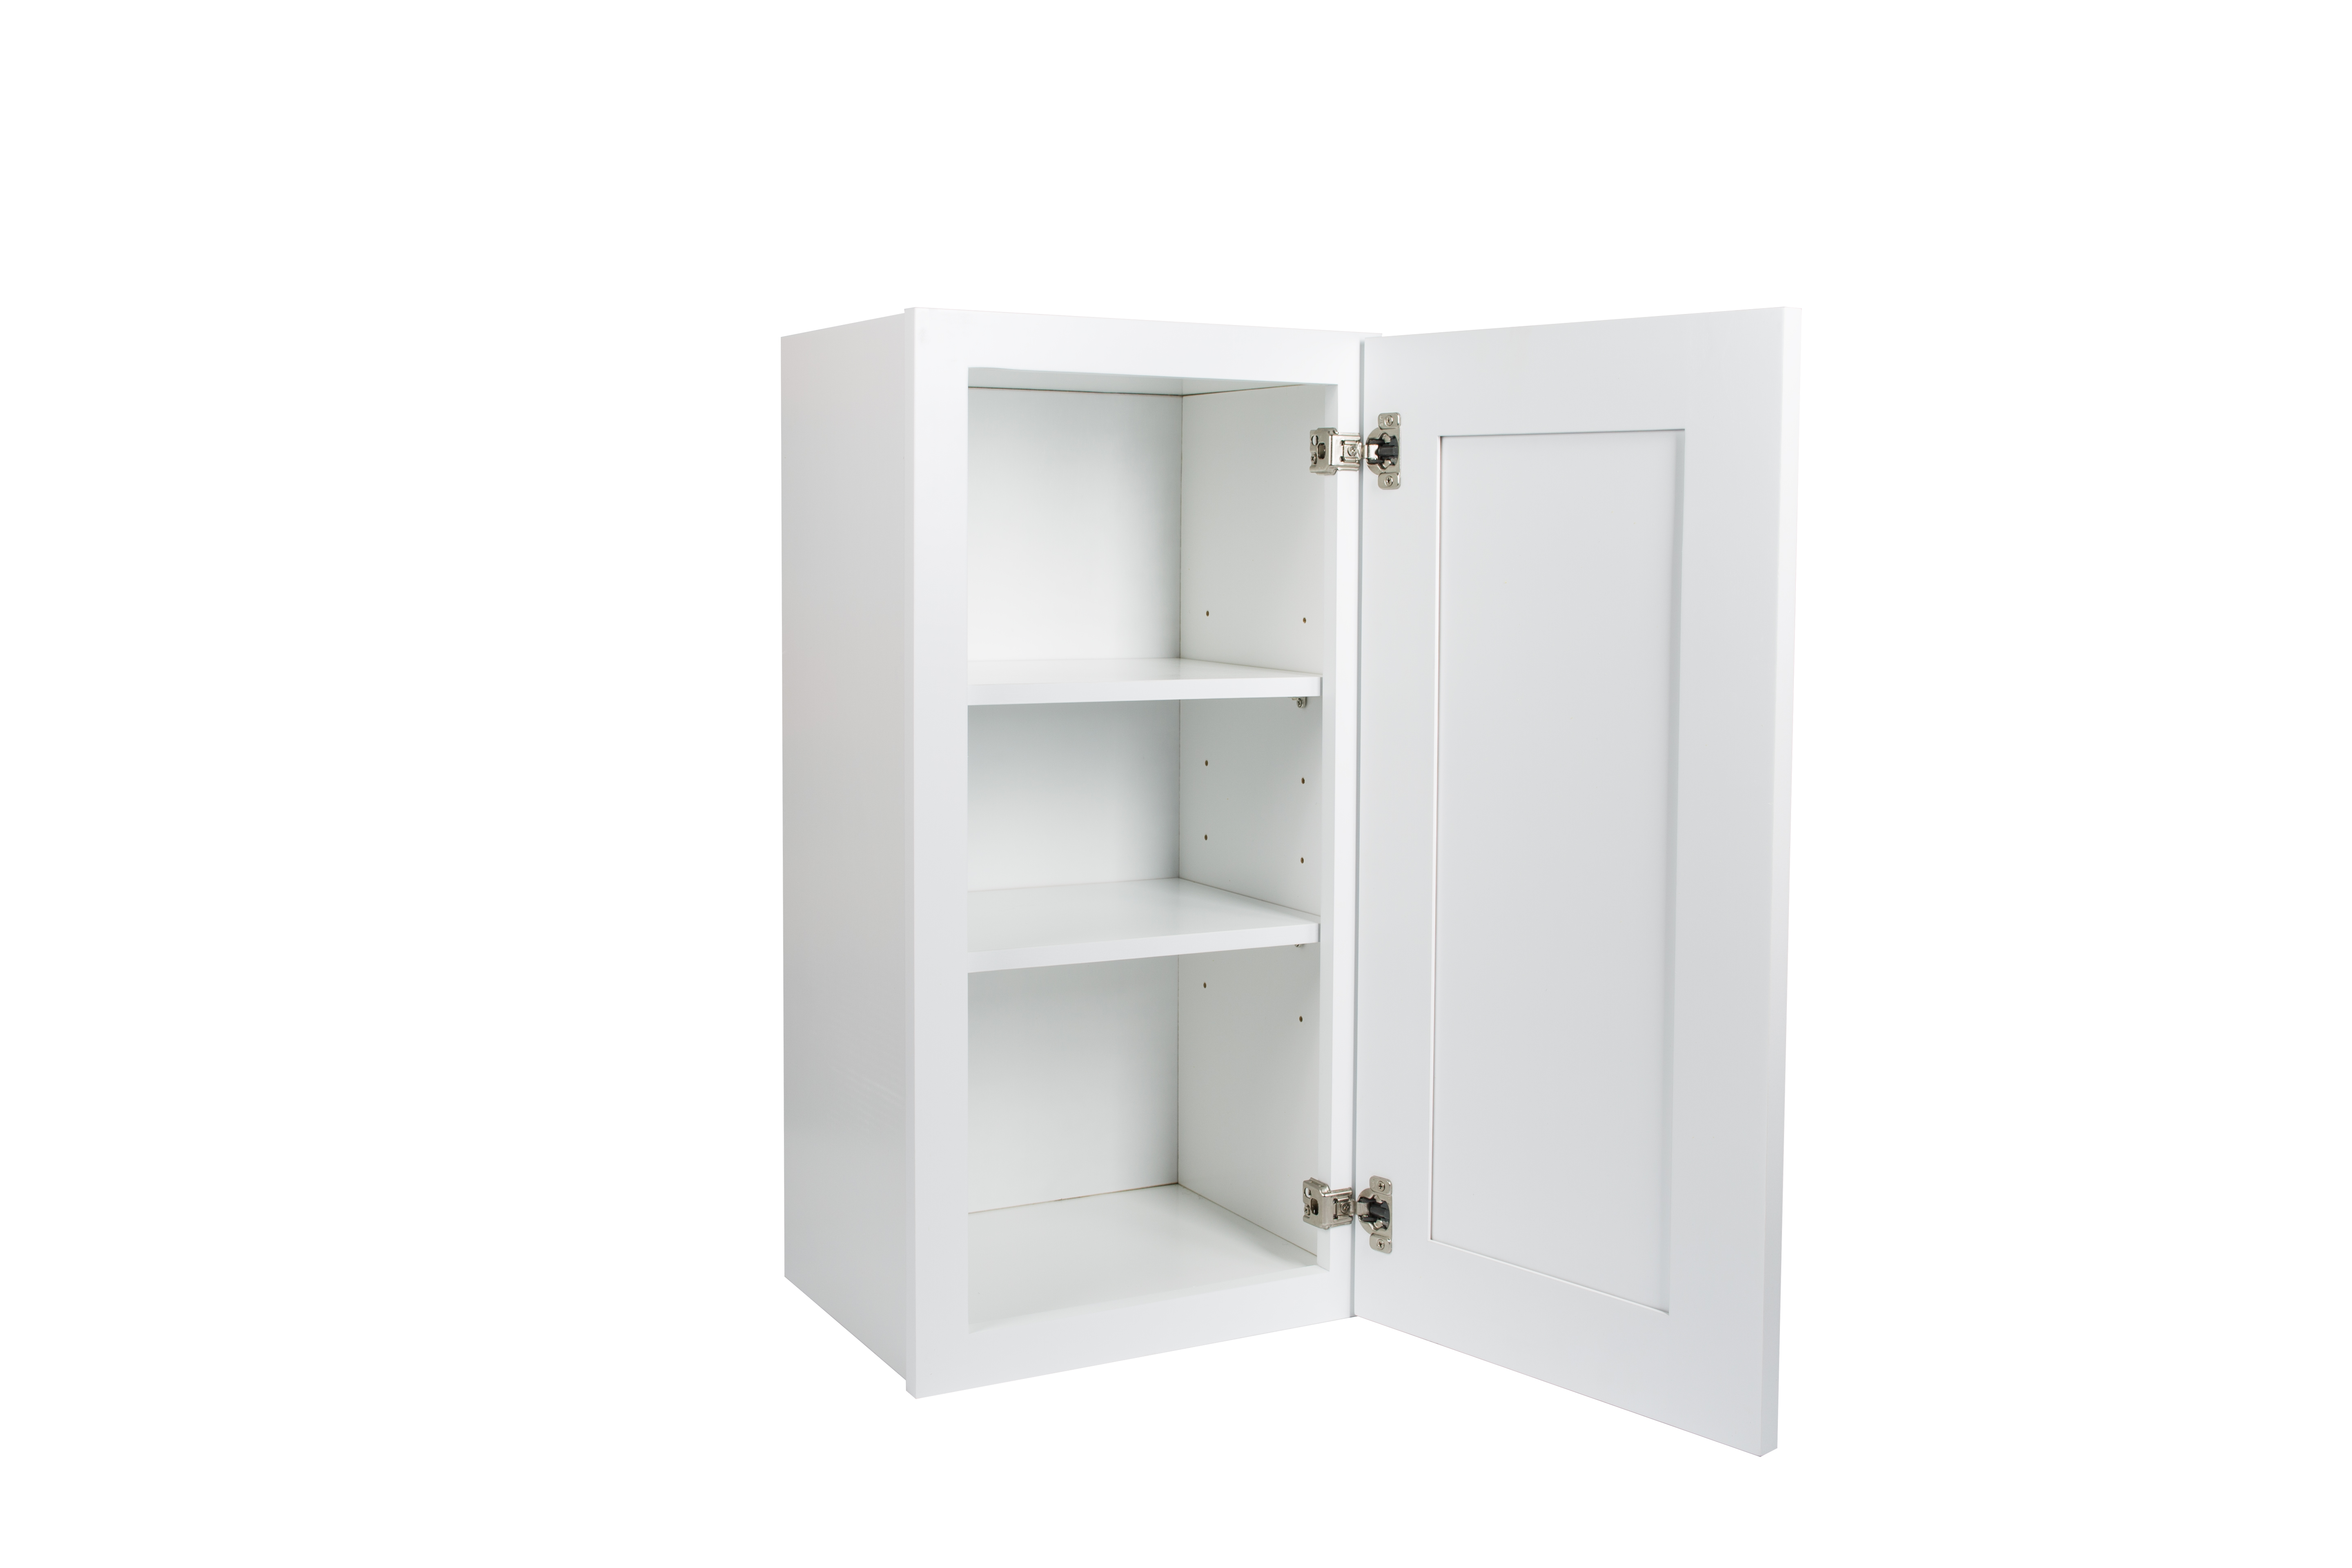 Ready to Assemble 9x36x12 in. Shaker Wall Cabinet with 1-Door and Adjustable Shelves in White